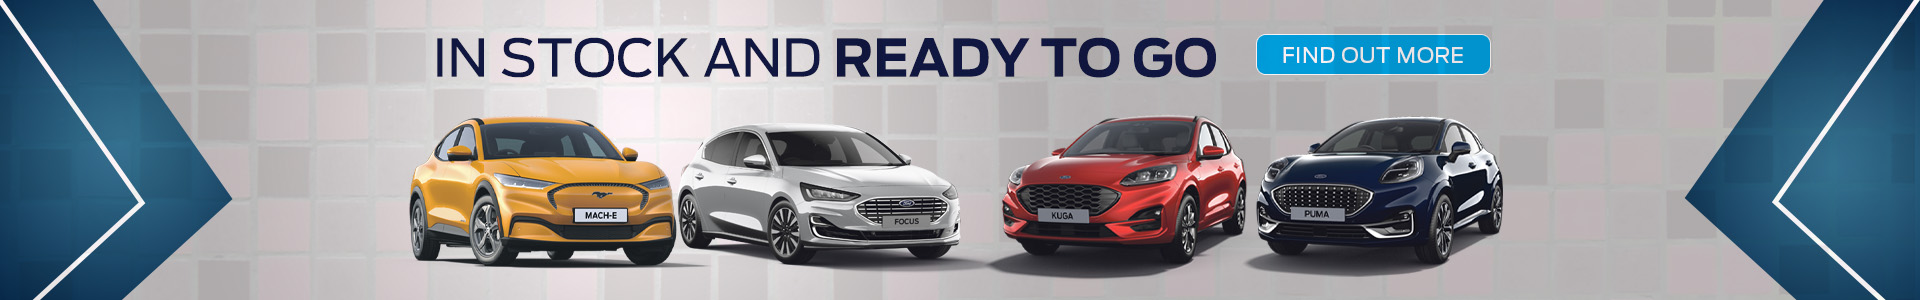 New Ford Cars - In Stock and ready to go - Order yours today